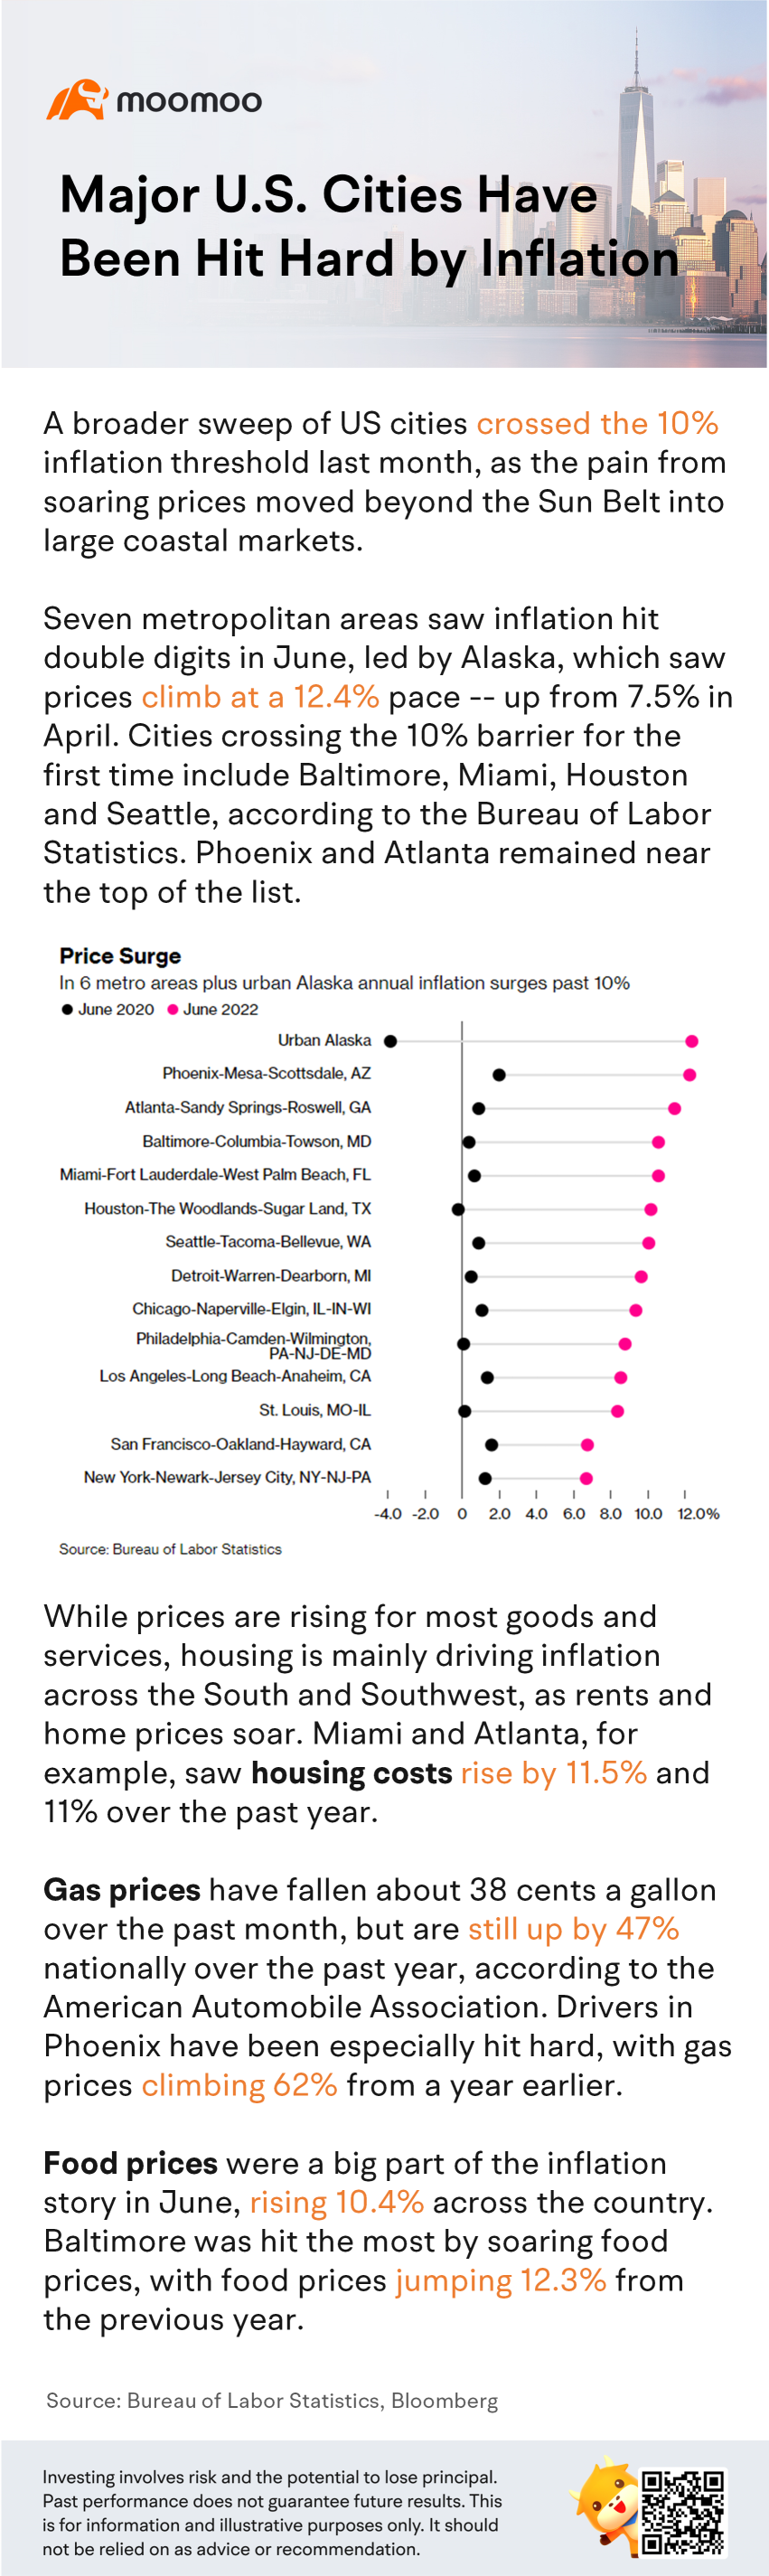 Major U.S. cities have been hit hard by inflation